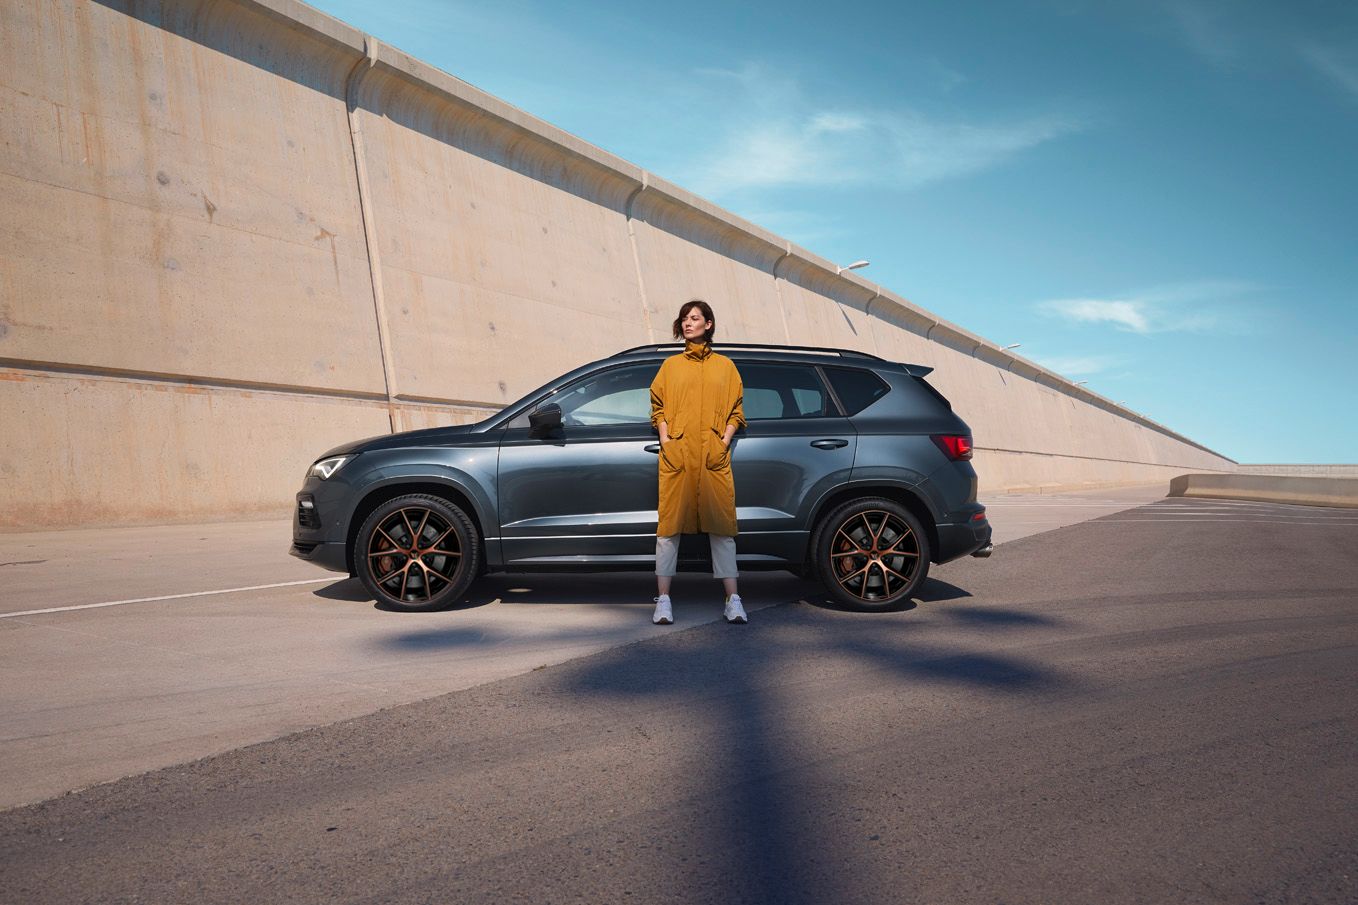 Grey CUPRA Ateca side view with person in yellow coat stood in front of it